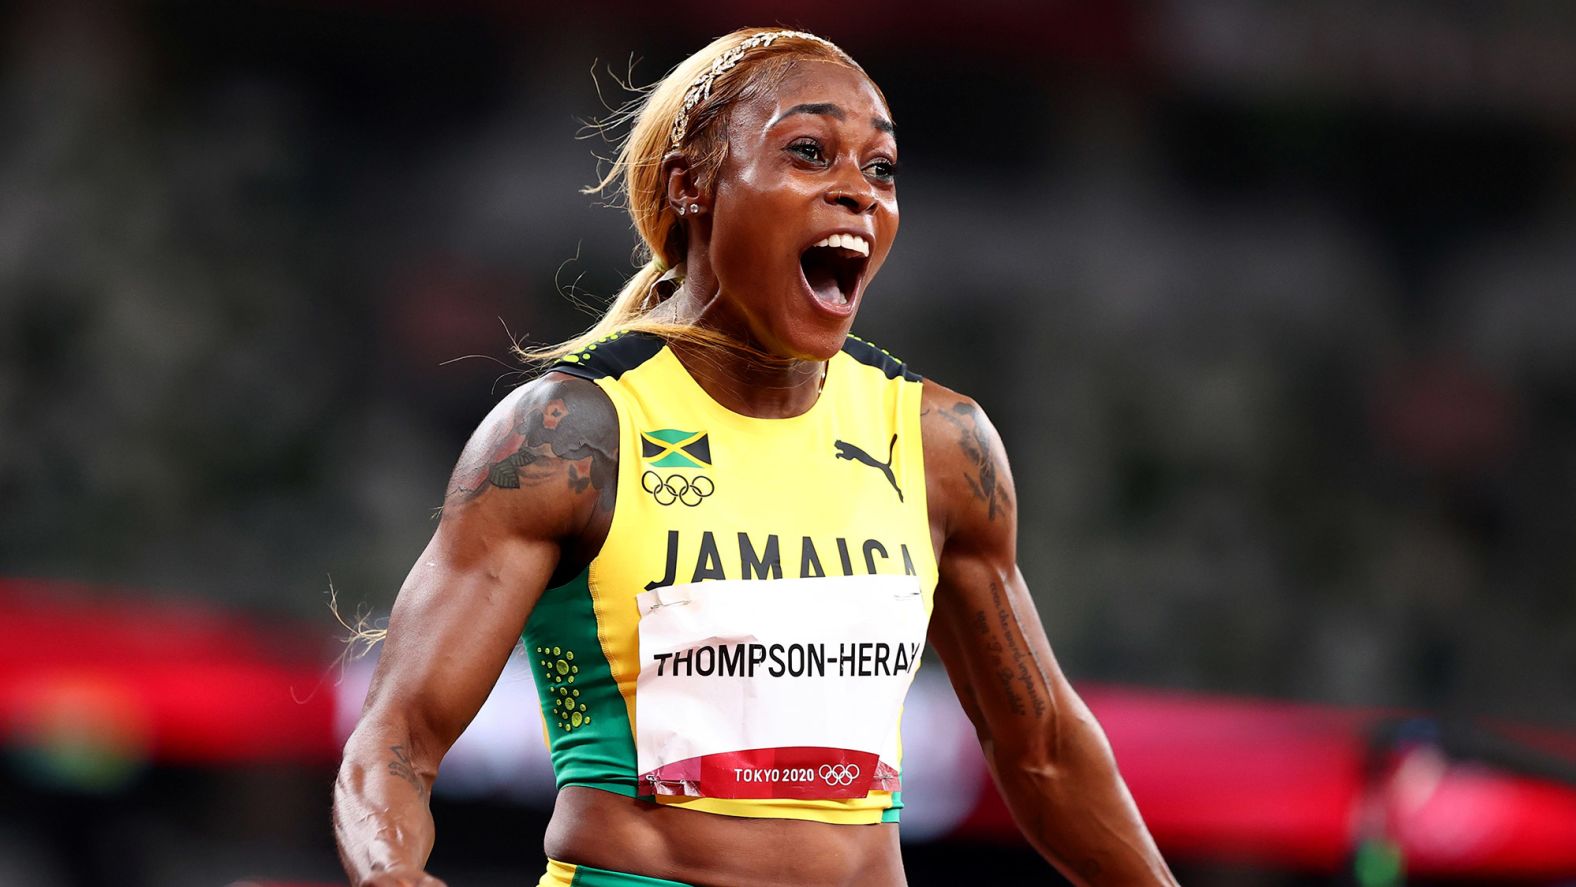 Jamaican sprinter Elaine Thompson-Herah celebrates after <a href="index.php?page=&url=https%3A%2F%2Fwww.cnn.com%2Fworld%2Flive-news%2Ftokyo-2020-olympics-07-31-21-spt%2Fh_fad429aba3c7d06c0e4de7fd7b3973ba" target="_blank">winning gold in the 100-meter dash</a> on July 31. She set an Olympic record time of 10.61 seconds as she defended her title from 2016.